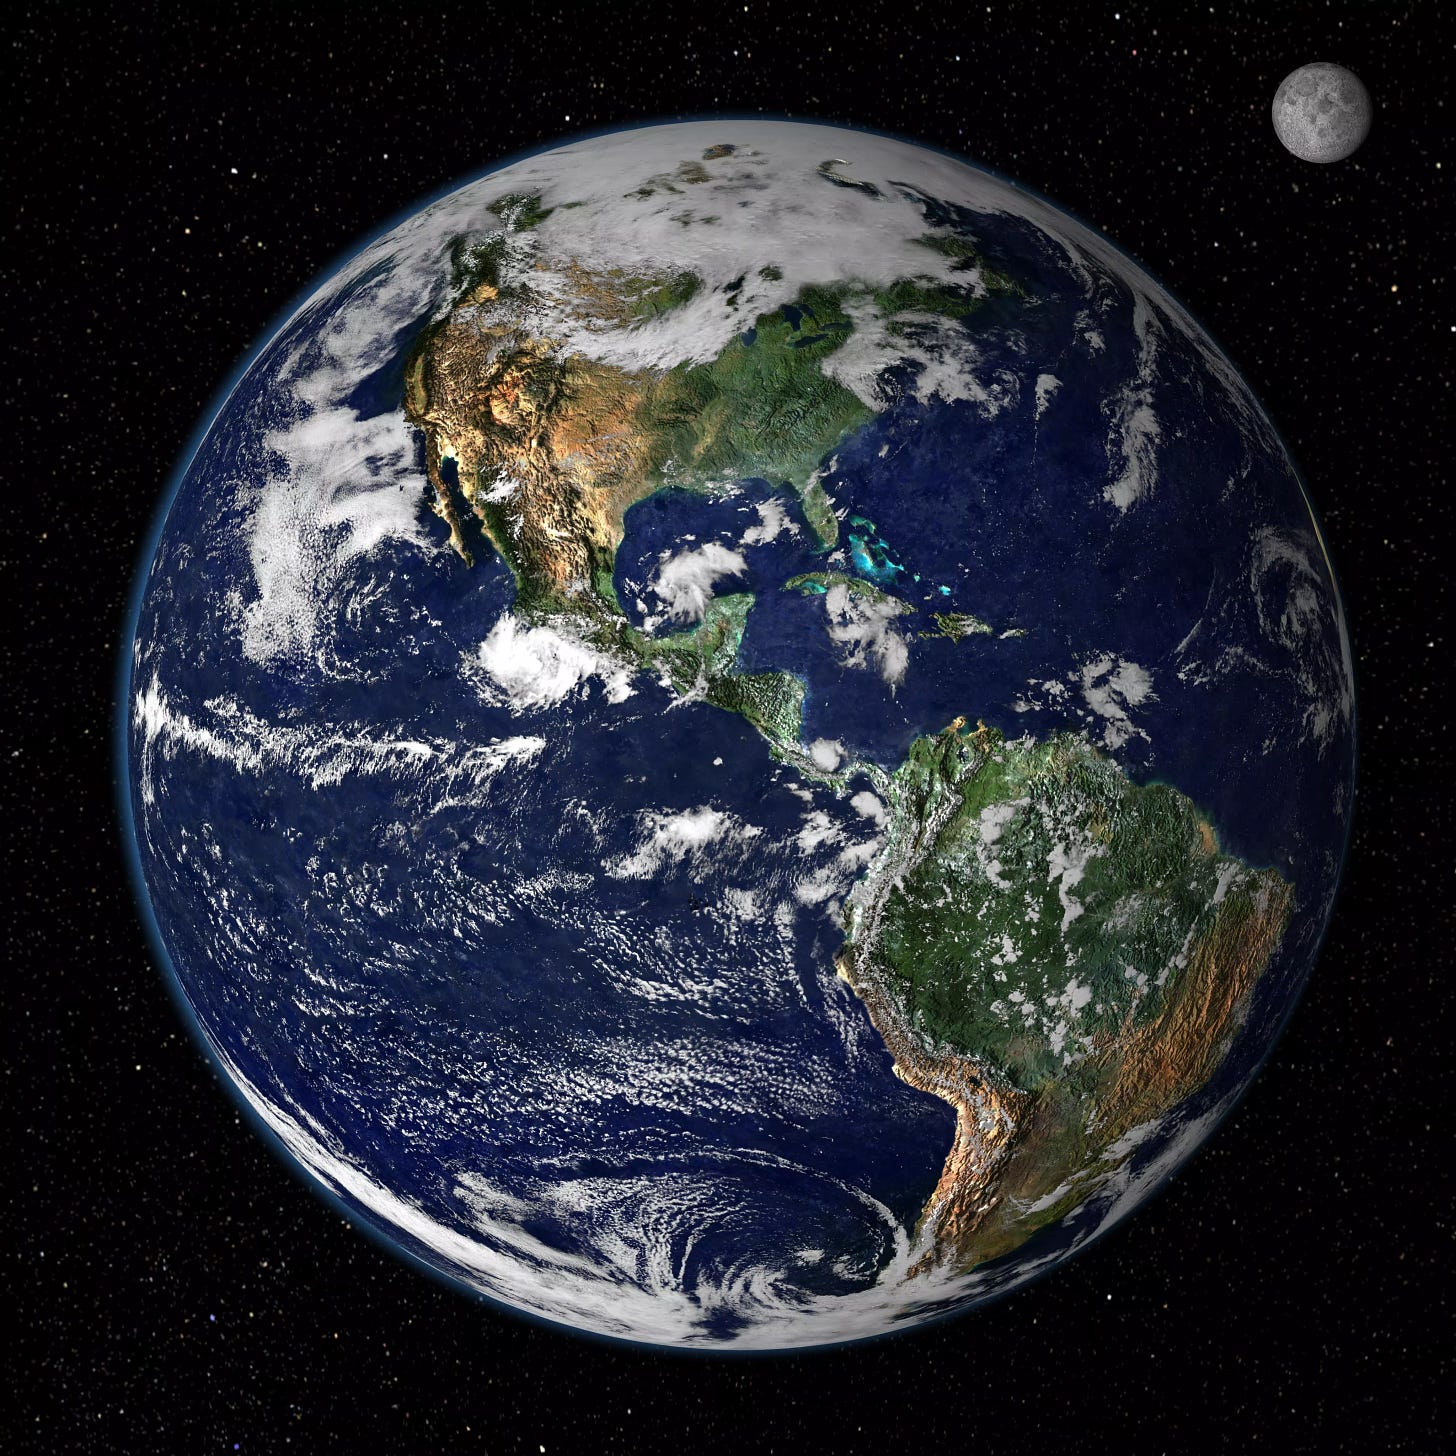 The Earth seen from space, NASA